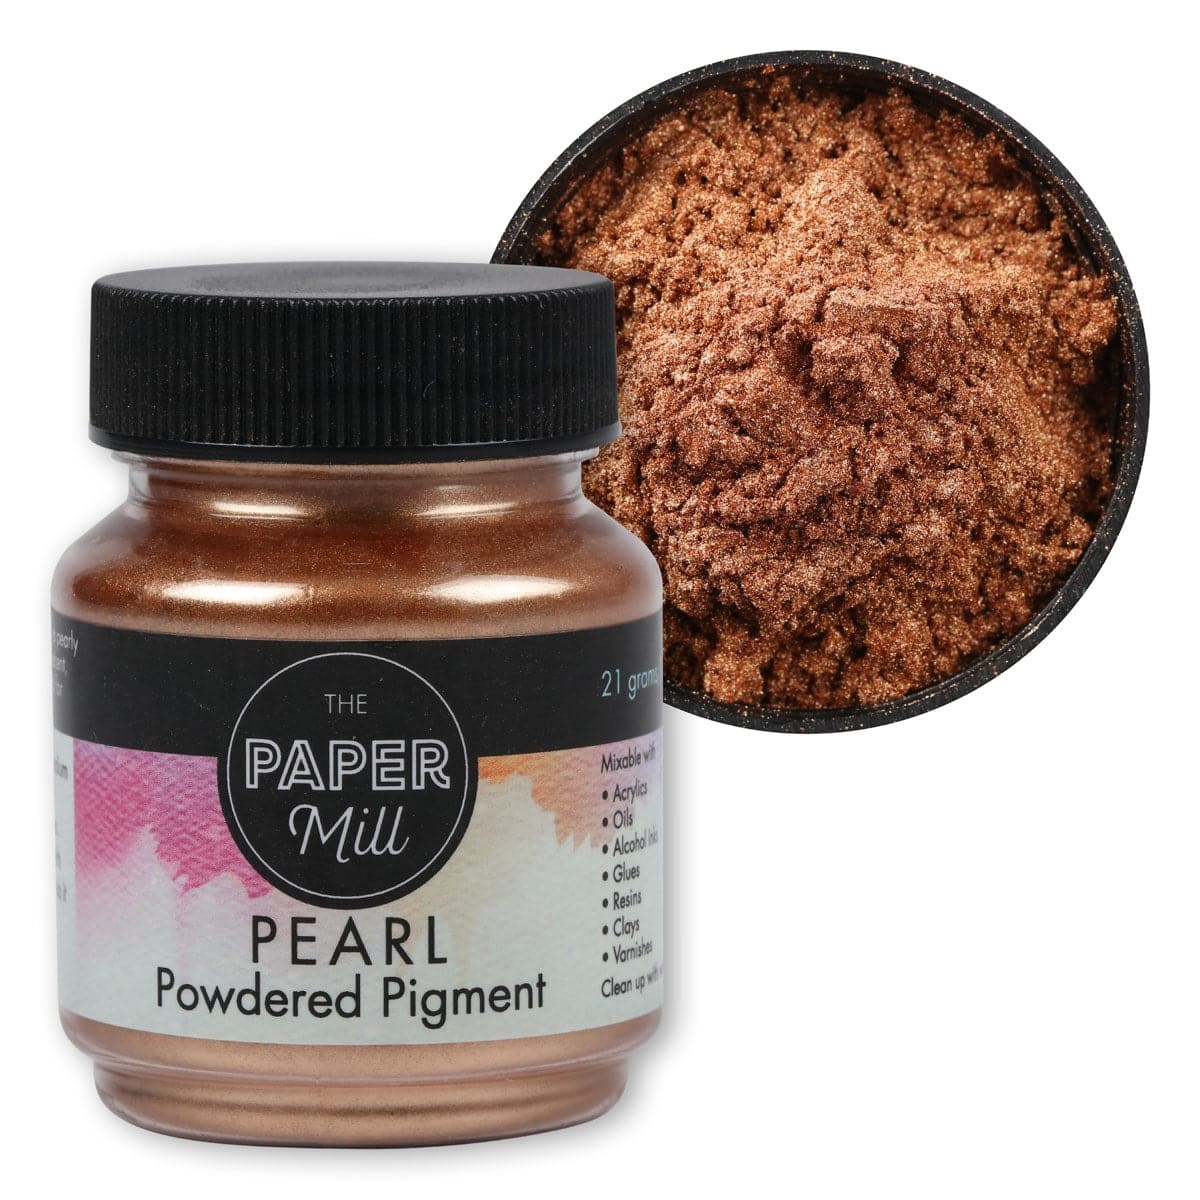 Image of The Paper Mill Pearl Powder Pigment 21g Metallic Copper